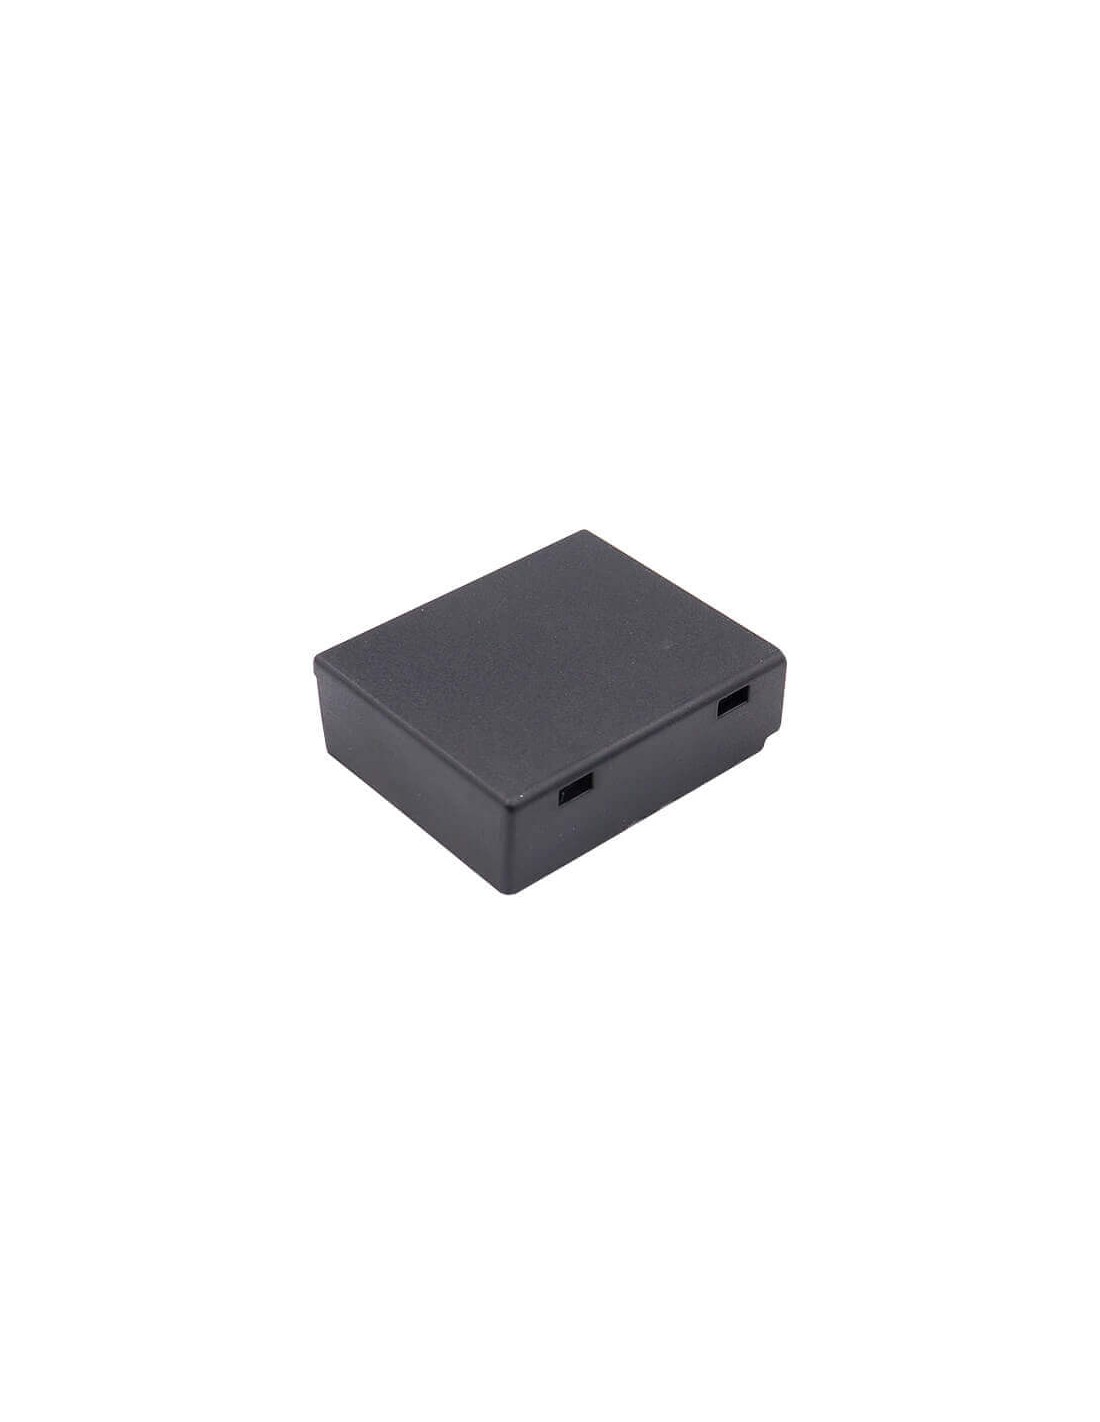 Battery for Eartec Comstar Wireless Headsets 3.7V, 950mAh - 3.52Wh